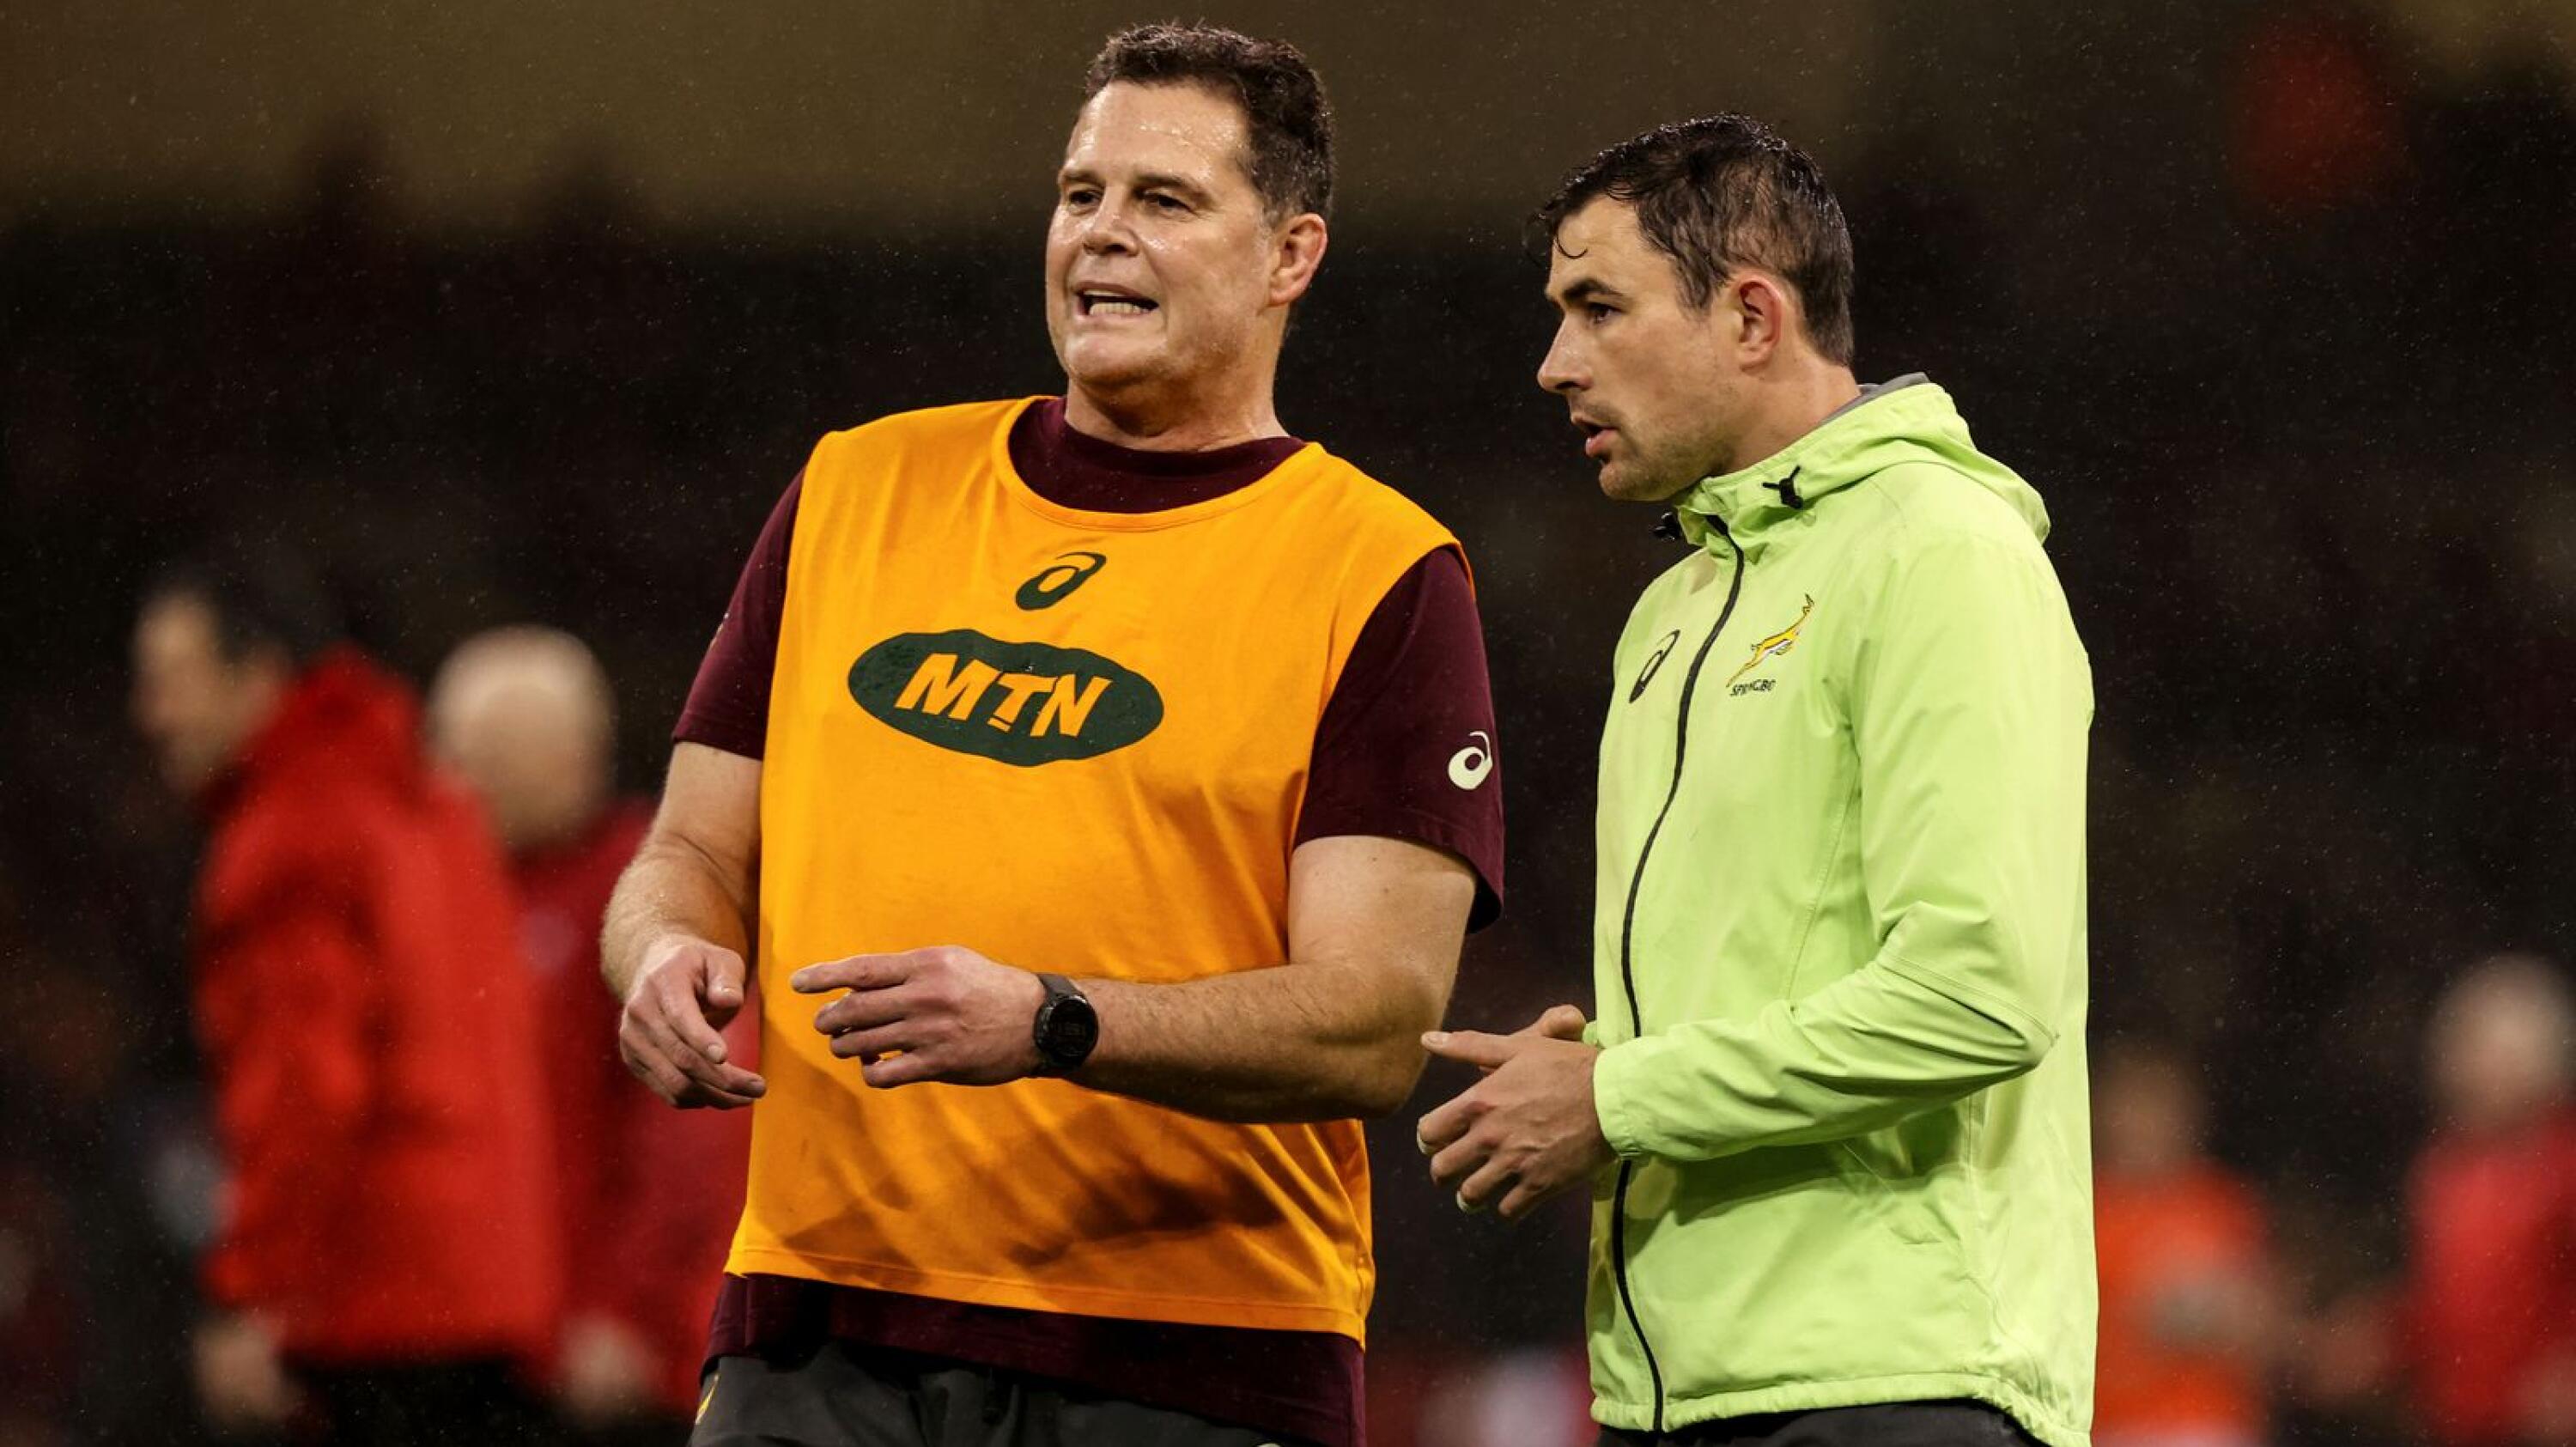 Felix Jones joined then coach Rassie Erasmus’ Boks in 2019 as a defence consultant and played a key role in their World Cup triumph.